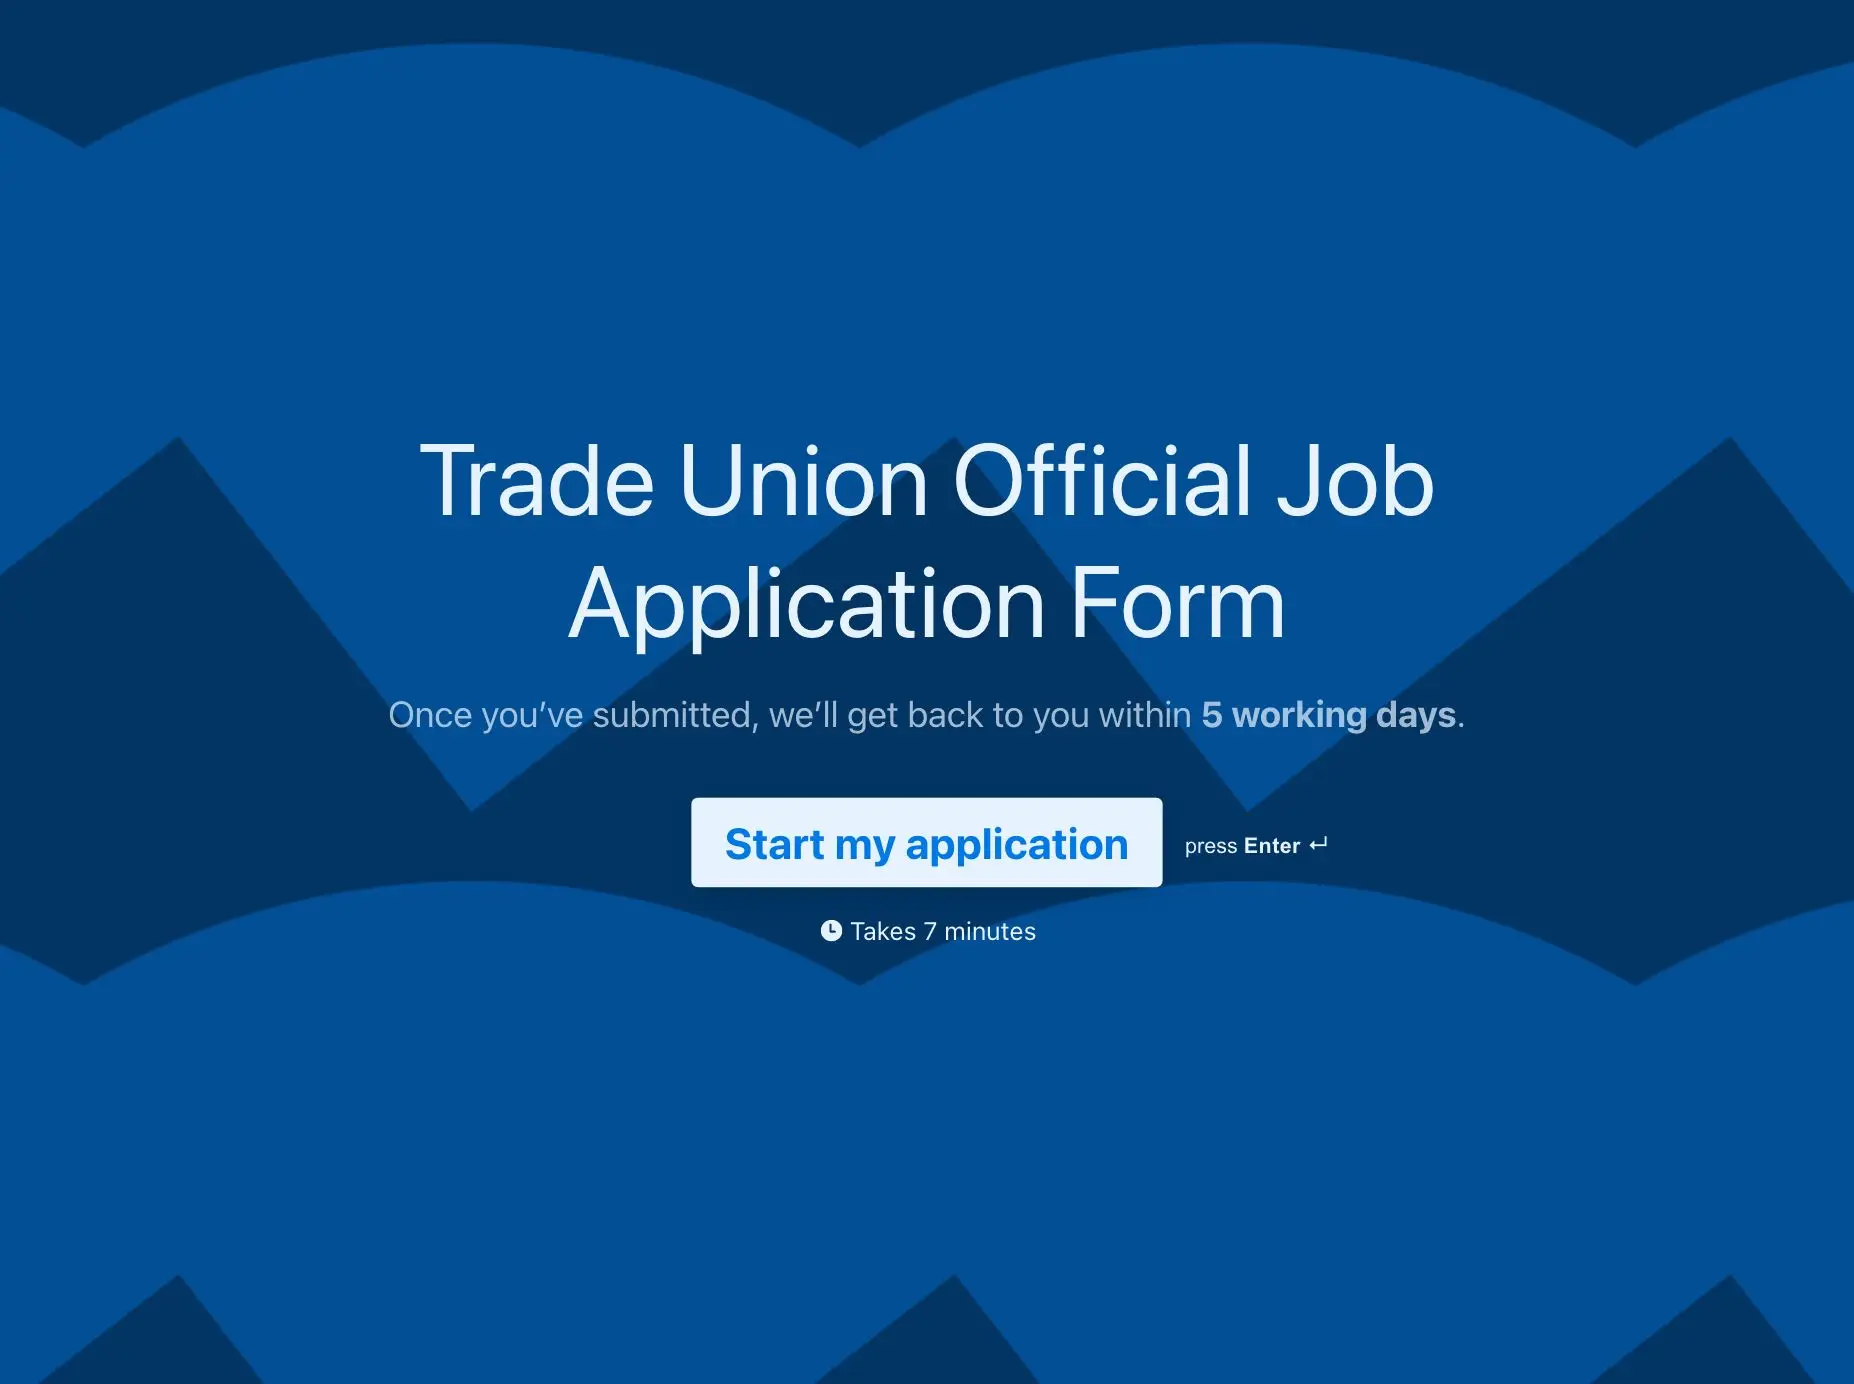 Trade Union Official Job Application Form Template Hero